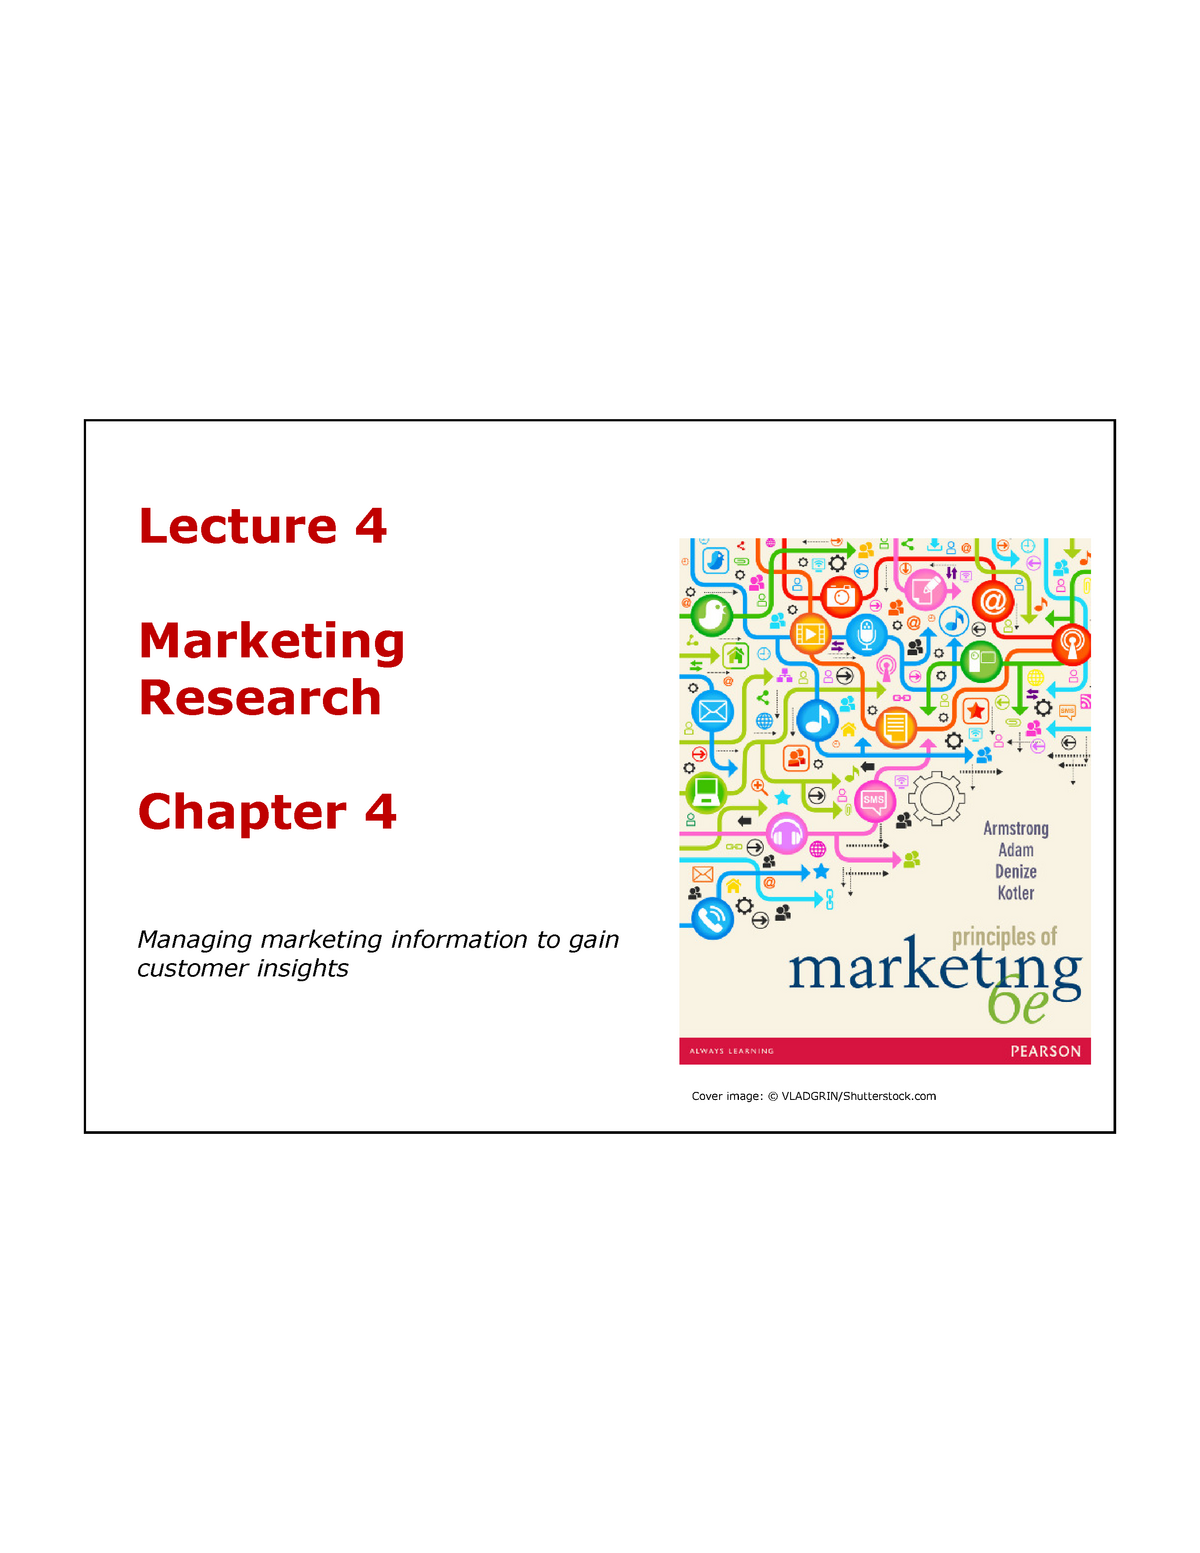 marketing research chapter 4 quizlet